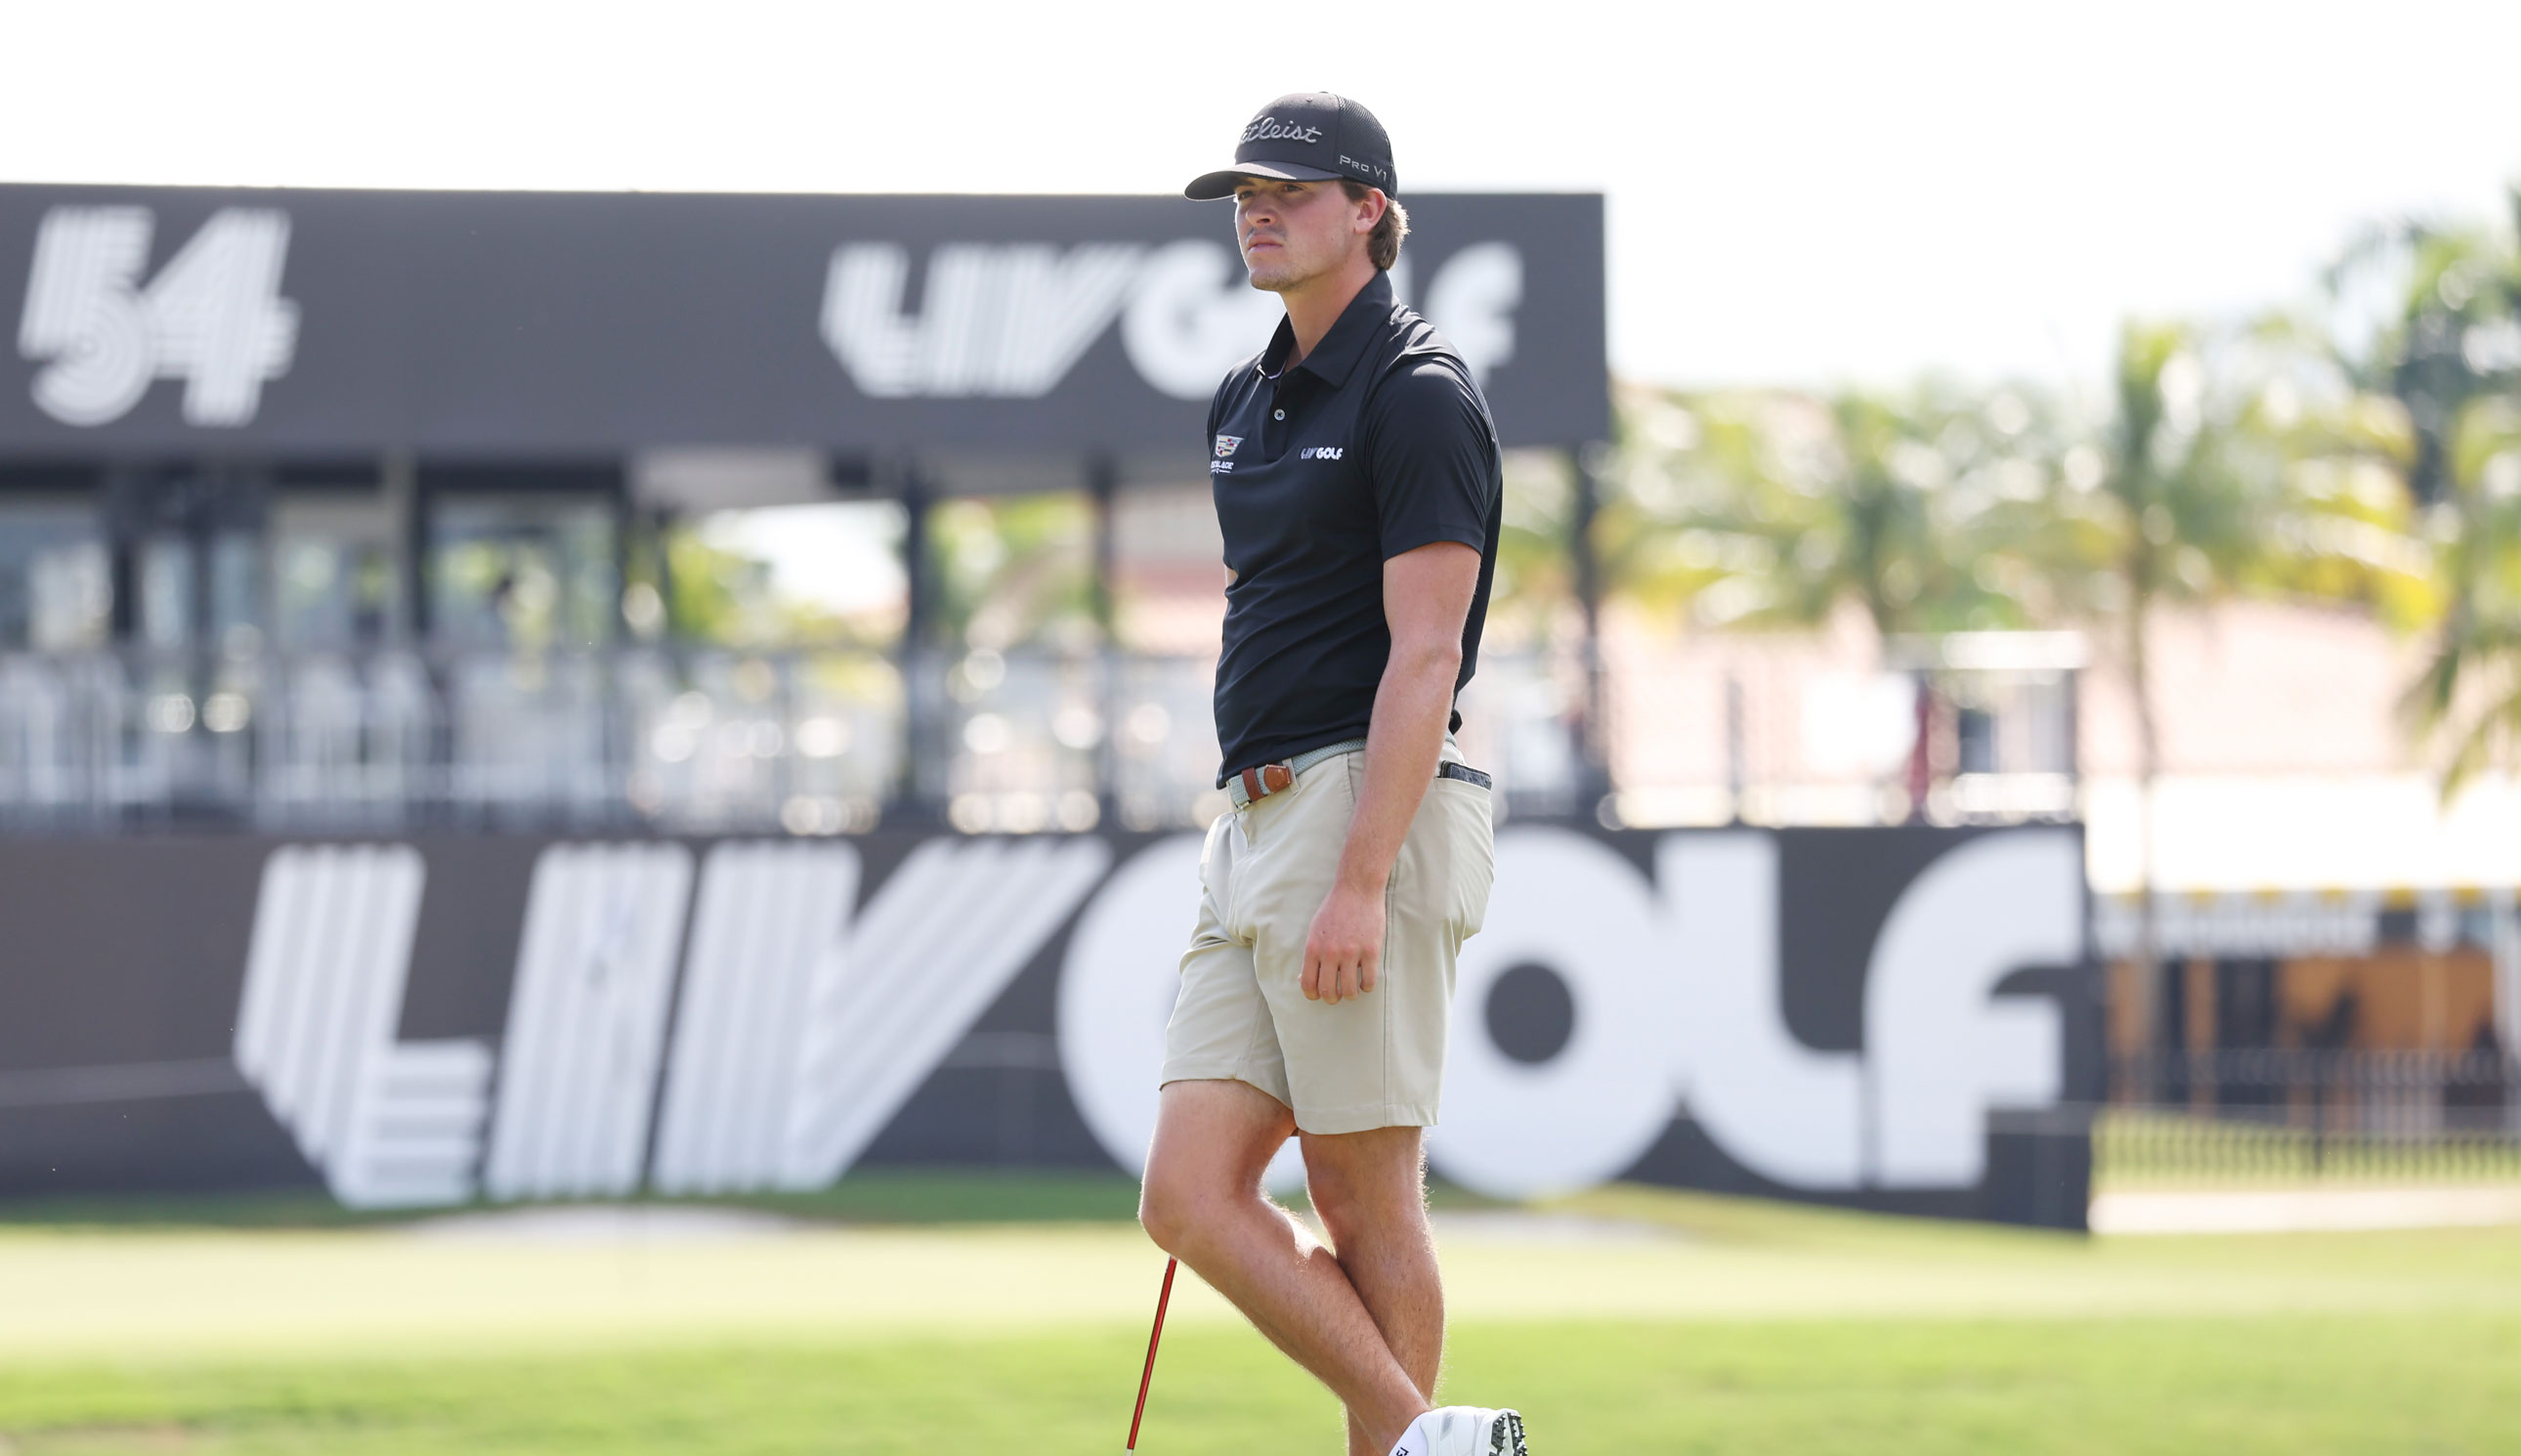 Former LIV Golfer Makes It Through First Stage Of PGA Tour Q School